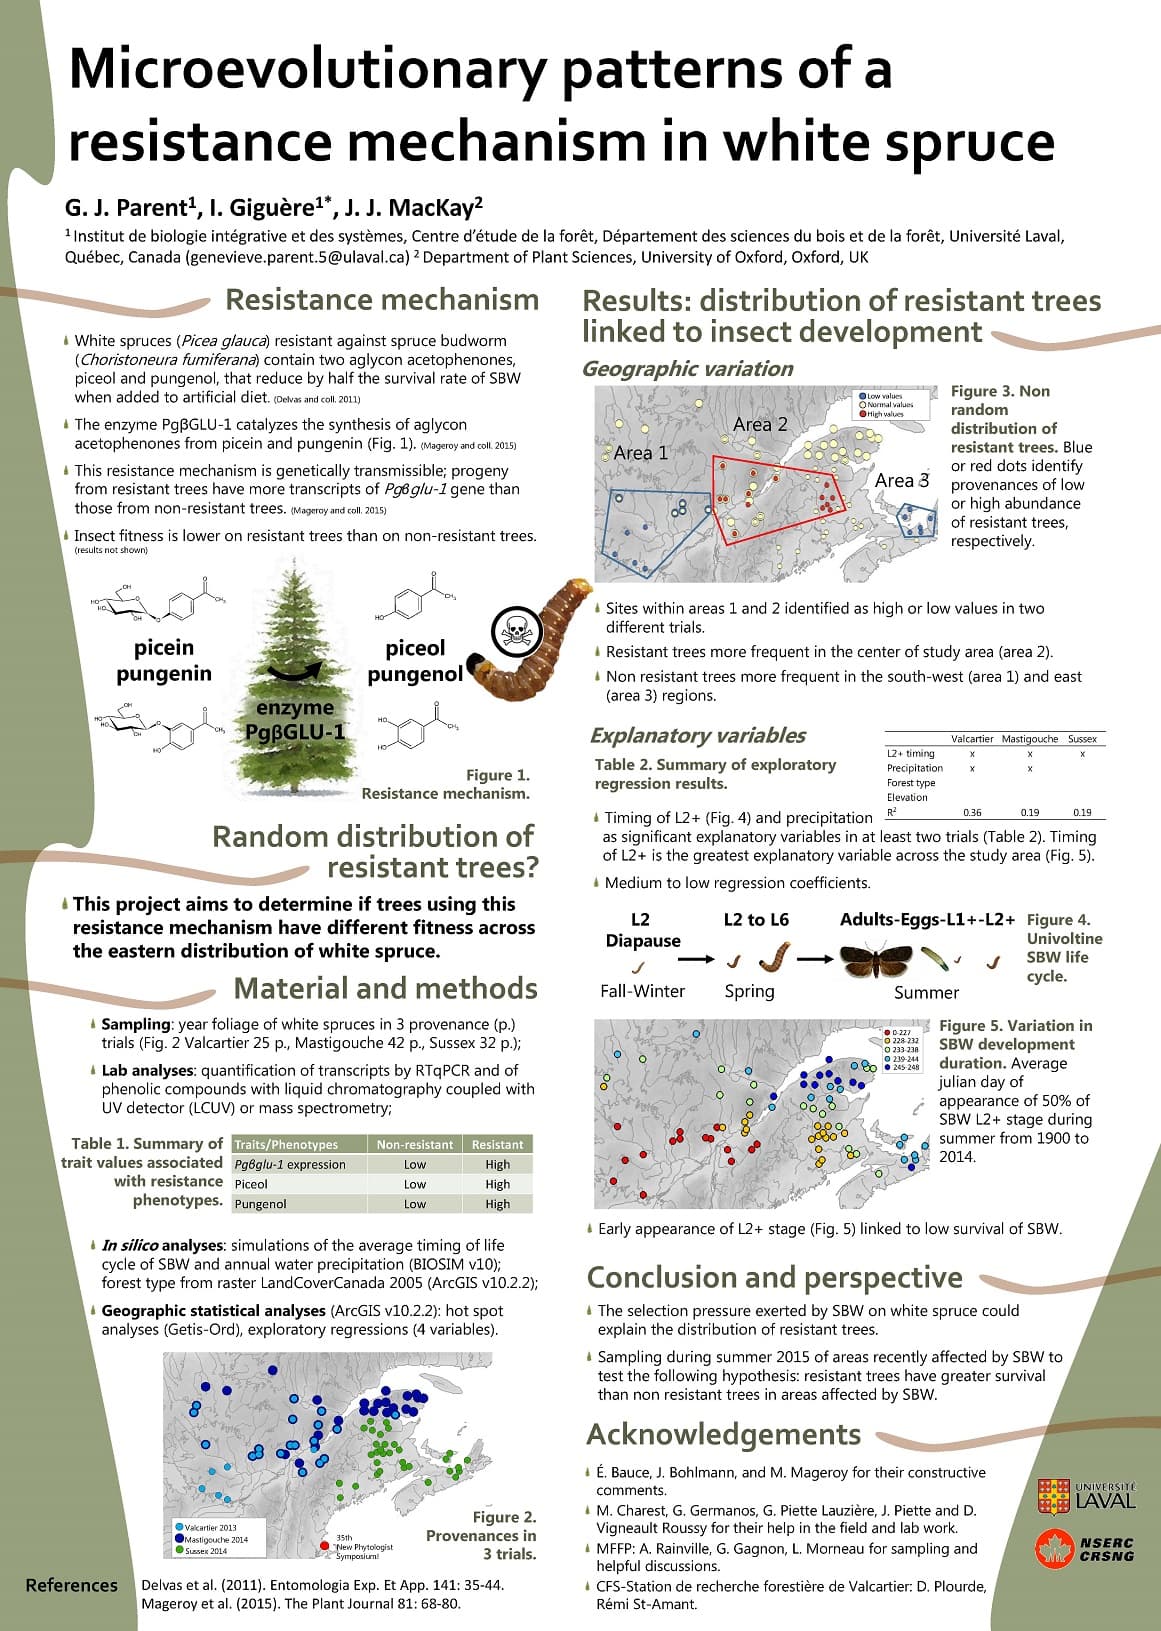 Microevolutionary
patterns of a
resistance mechanism in white spruce
G. J. Parent¹, I. Giguère¹*, J. J. MacKay²
¹ Institut de biologie intégrative et des systèmes, Centre d'étude de la forêt, Département des sciences du bois et de la forêt, Université Laval,
Québec, Canada (genevieve.parent.5@ulaval.ca) 2 Department of Plant Sciences, University of Oxford, Oxford, UK
Resistance mechanism
Results: distribution of resistant trees
linked to insect development
* White spruces (Picea glauca) resistant against spruce budworm
(Choristoneura fumiferana) contain two aglycon acetophenones,
piceol and pungenol, that reduce by half the survival rate of SBW
when added to artificial diet. (Delvas and coll. 2011)
Geographic variation
Low values
O Normal values
●High values
Area 2
The enzyme PgBGLU-1 catalyzes the synthesis of aglycon
acetophenones from picein and pungenin (Fig. 1). (Mageroy and coll. 2015)
Area 1
This resistance mechanism is genetically transmissible; progeny
from resistant trees have more transcripts of PgBglu-1 gene than
those from non-resistant trees. (Mageroy and coll. 2015)
Figure 3. Non
random
distribution of
resistant trees. Blue
or red dots identify
provenances of low
or high abundance
of resistant trees,
respectively.
Area 3
68
Insect fitness is lower on resistant trees than on non-resistant trees.
(results not shown)
sol
Sites within areas 1 and 2 identified as high or low values in two
different trials.
picein
pungenin
piceol
pungenol
* Resistant trees more frequent in the center of study area (area 2).
Non resistant trees more frequent in the south-west (area 1) and east
(area 3) regions.
enzyme
PgBGLU-1
Explanatory variables
Valcartier Mastigouche Sussex
X
X
X
X
Figure 1.
Resistance mechanism.
Table 2. Summary of exploratory
regression results.
L2+ timing
Precipitation
Forest type
Elevation
R²
0.36
0.19
0.19
Random distribution of
resistant trees?
Timing of L2+ (Fig. 4) and precipitation
as significant explanatory variables in at least two trials (Table 2). Timing
of L2+ is the greatest explanatory variable across the study area (Fig. 5).
* Medium to low regression coefficients.
This project aims to determine if trees using this
resistance mechanism have different fitness across
the eastern distribution of white spruce.
L2 to L6
Adults-Eggs-L1+-L2+
L2
Diapause
Figure 4.
Univoltine
SBW life
cycle.
Material and methods
Fall-Winter
Spring
Summer
Sampling: year foliage of white spruces in 3 provenance (p.)
trials (Fig. 2 Valcartier 25 p., Mastigouche 42 p., Sussex 32 p.);
Figure 5. Variation in
SBW development
O
O
8
* Lab analyses: quantification of transcripts by RTqPCR and of
phenolic compounds with liquid chromatography coupled with
UV detector (LCUV) or mass spectrometry;
duration. Average
julian day of
appearance of 50% of
SBW L2+ stage during
summer from 1900 to
Table 1. Summary of Traits/Phenotypes
trait values associated Pg8glu-1 expression
Non-resistant Resistant
Low
68 2014.
High
with resistance Piceol
phenotypes. Pungenol
Low
High
Low
High
* Early appearance of L2+ stage (Fig. 5) linked to low survival of SBW.
In silico analyses: simulations of the average timing of life
cycle of SBW and annual water precipitation (BIOSIM v10);
forest type from raster LandCoverCanada 2005 (ArcGIS v10.2.2);
Conclusion and perspective
Geographic statistical analyses (ArcGIS v10.2.2): hot spot
analyses (Getis-Ord), exploratory regressions (4 variables).
The selection pressure exerted by SBW on white spruce could
explain the distribution of resistant trees.
Sampling during summer 2015 of areas recently affected by SBW to
test the following hypothesis: resistant trees have greater survival
than non resistant trees in areas affected by SBW.
Acknowledgements
O
É. Bauce, J. Bohlmann, and M. Mageroy for their constructive
comments.
M. Charest, G. Germanos, G. Piette Lauzière, J. Piette and D.
Vigneault Roussy for their help in the field and lab work.
Figure 2.
Provenances in
3 trials.
●Valcartier 2013
Mastigouche 2014
Sussex 2014
New Phytologist
Symposium!
+ MFFP: A. Rainville, G. Gagnon, L. Morneau for sampling and
helpful discussions.
Delvas et al. (2011). Entomologia Exp. Et App. 141: 35-44.
Mageroy et al. (2015). The Plant Journal 81: 68-80.
+ CFS-Station de recherche forestière de Valcartier: D. Plourde,
Rémi St-Amant.
References
0-227
O228-232
O 233-238
O 239-244
245-248
UNIVERSITÉ
LAVAL
NSERC
CRSNG